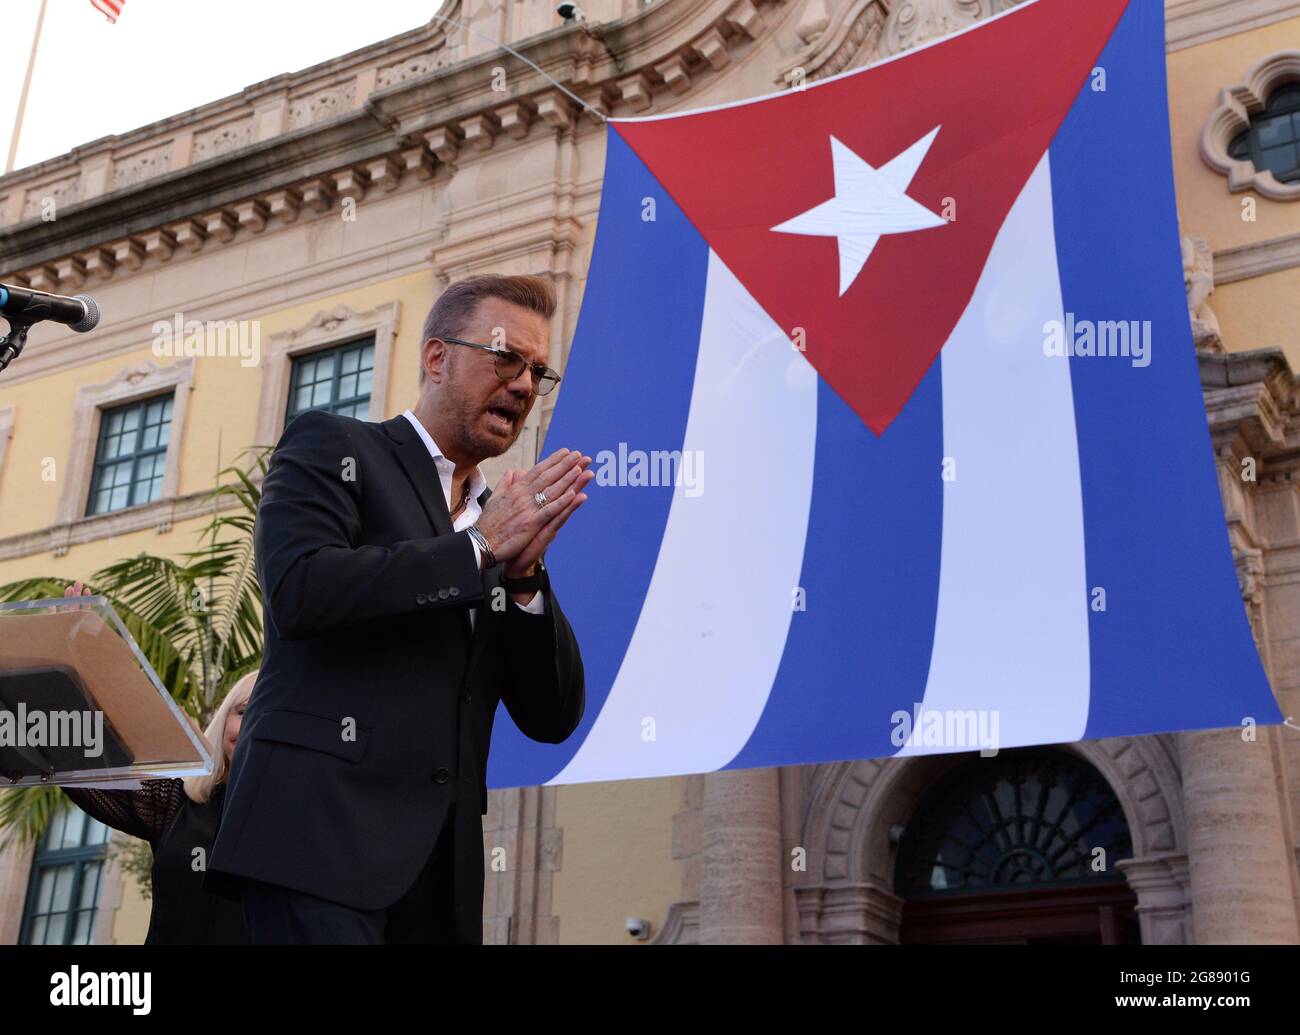 MIAMI, FL - JULY 17: Willy Chirino speaks as Cuban Americans show support for protestors in Cuba during the Rally For Democracy at the Freedom Tower on July 17, 2021 in Miami Florida. Credit: mpi04/MediaPunch Stock Photo